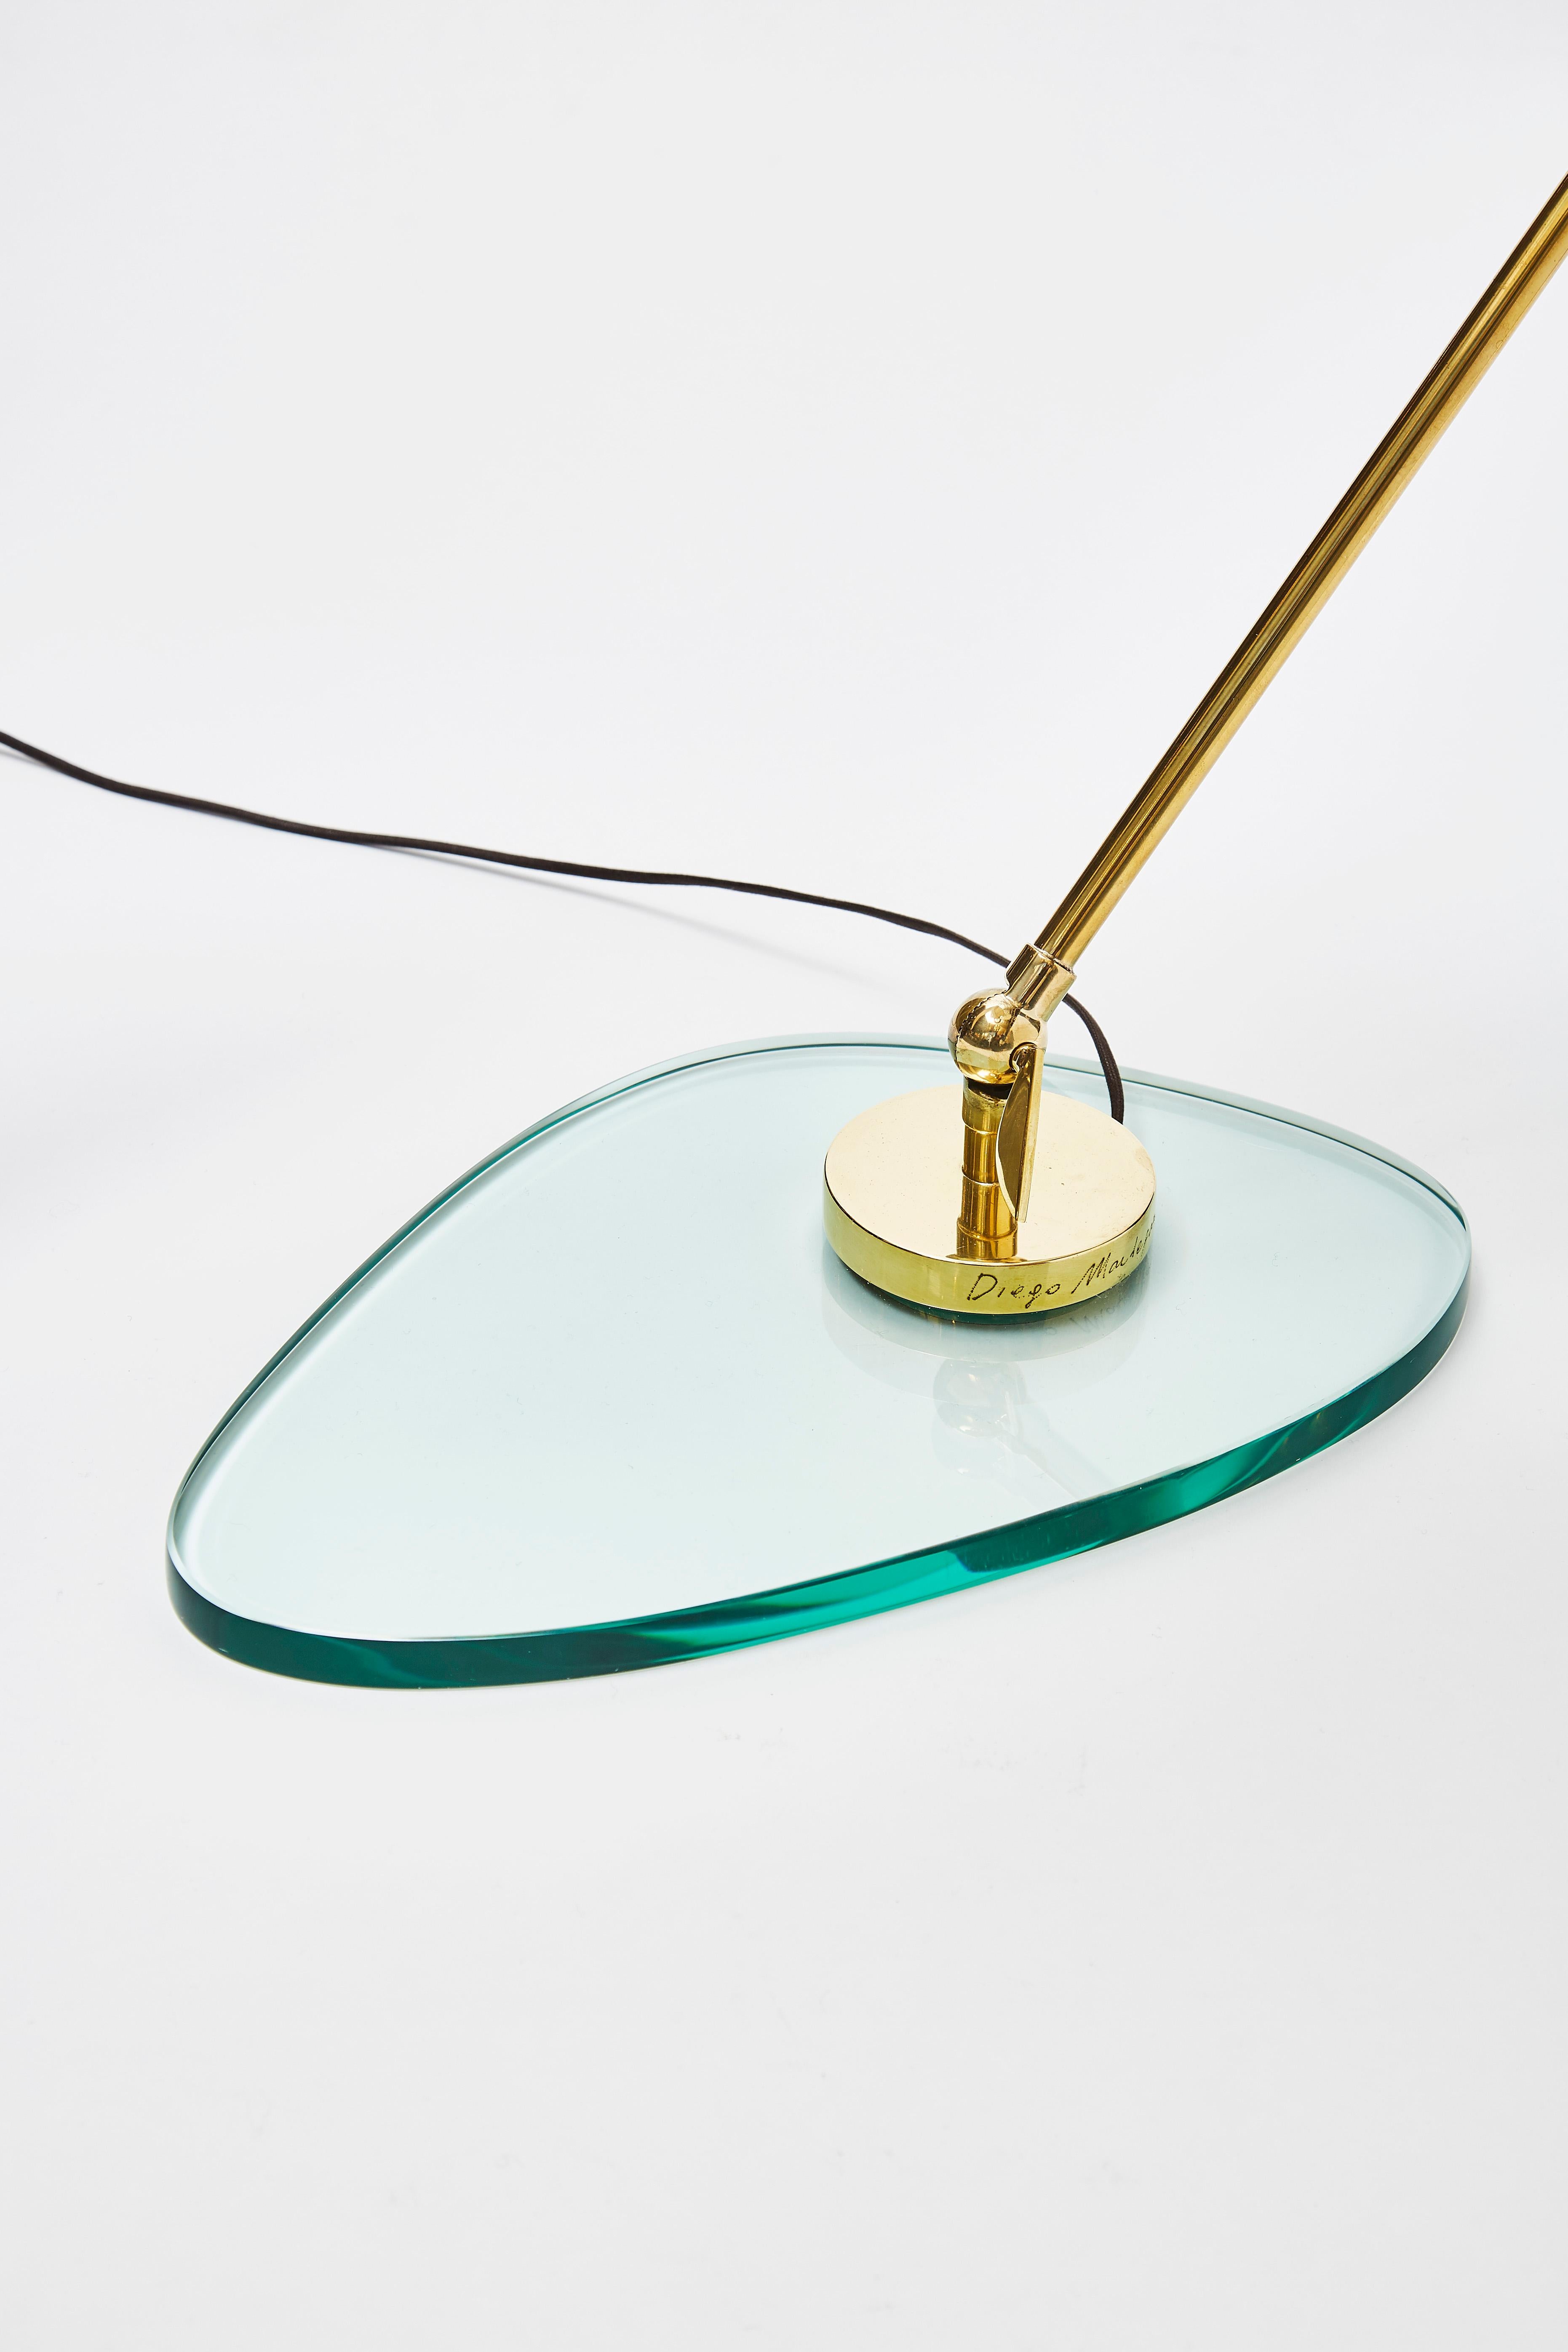 Parchment, Brass and Glass Table Lamp by Diego Mardegan for Glustin Luminaires For Sale 3